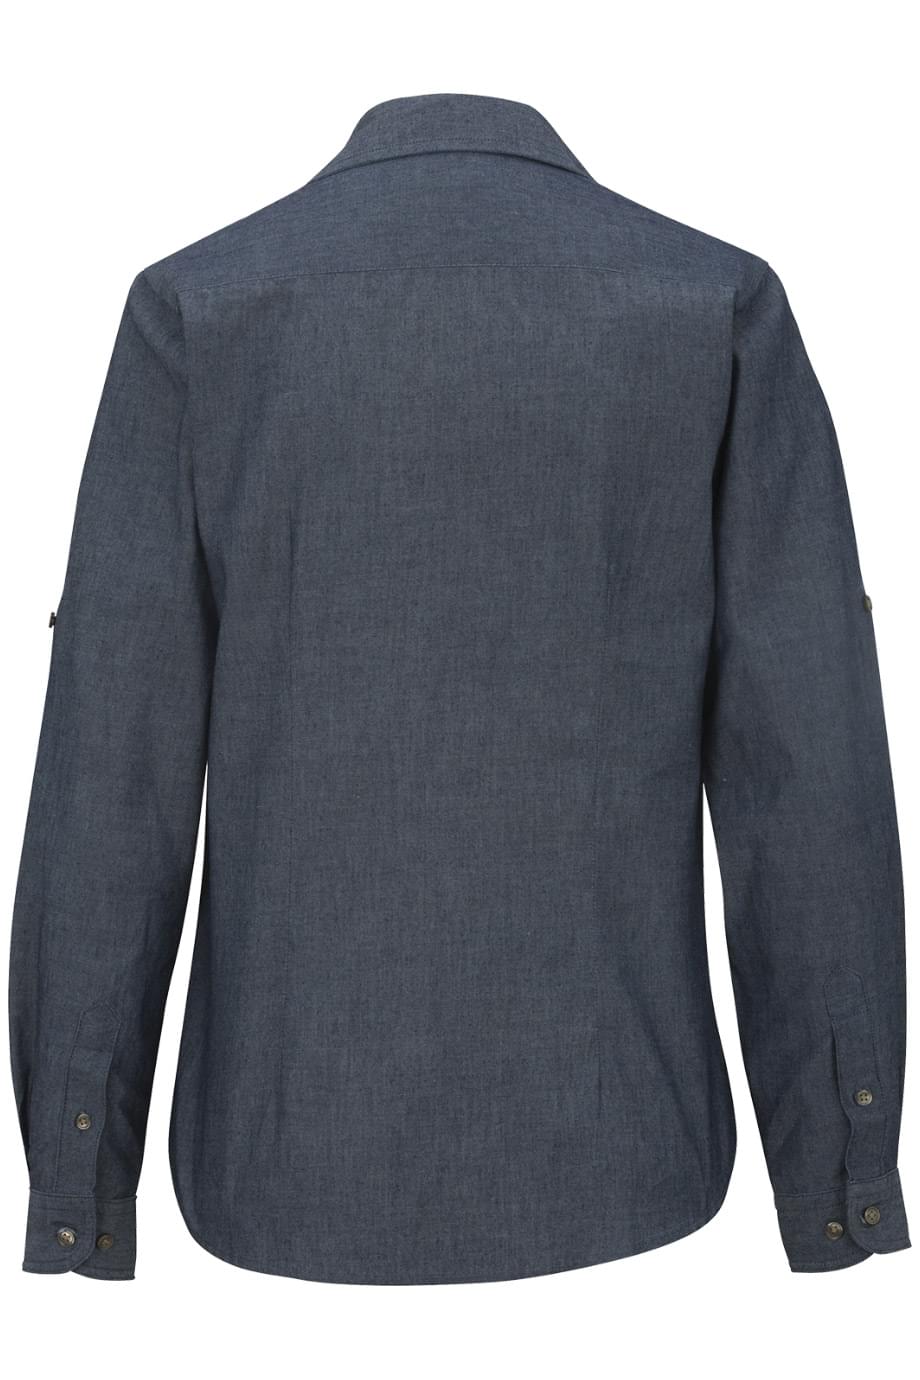 CHAMBRAY SHIRT with TWO POCKETS | Edwards Garment